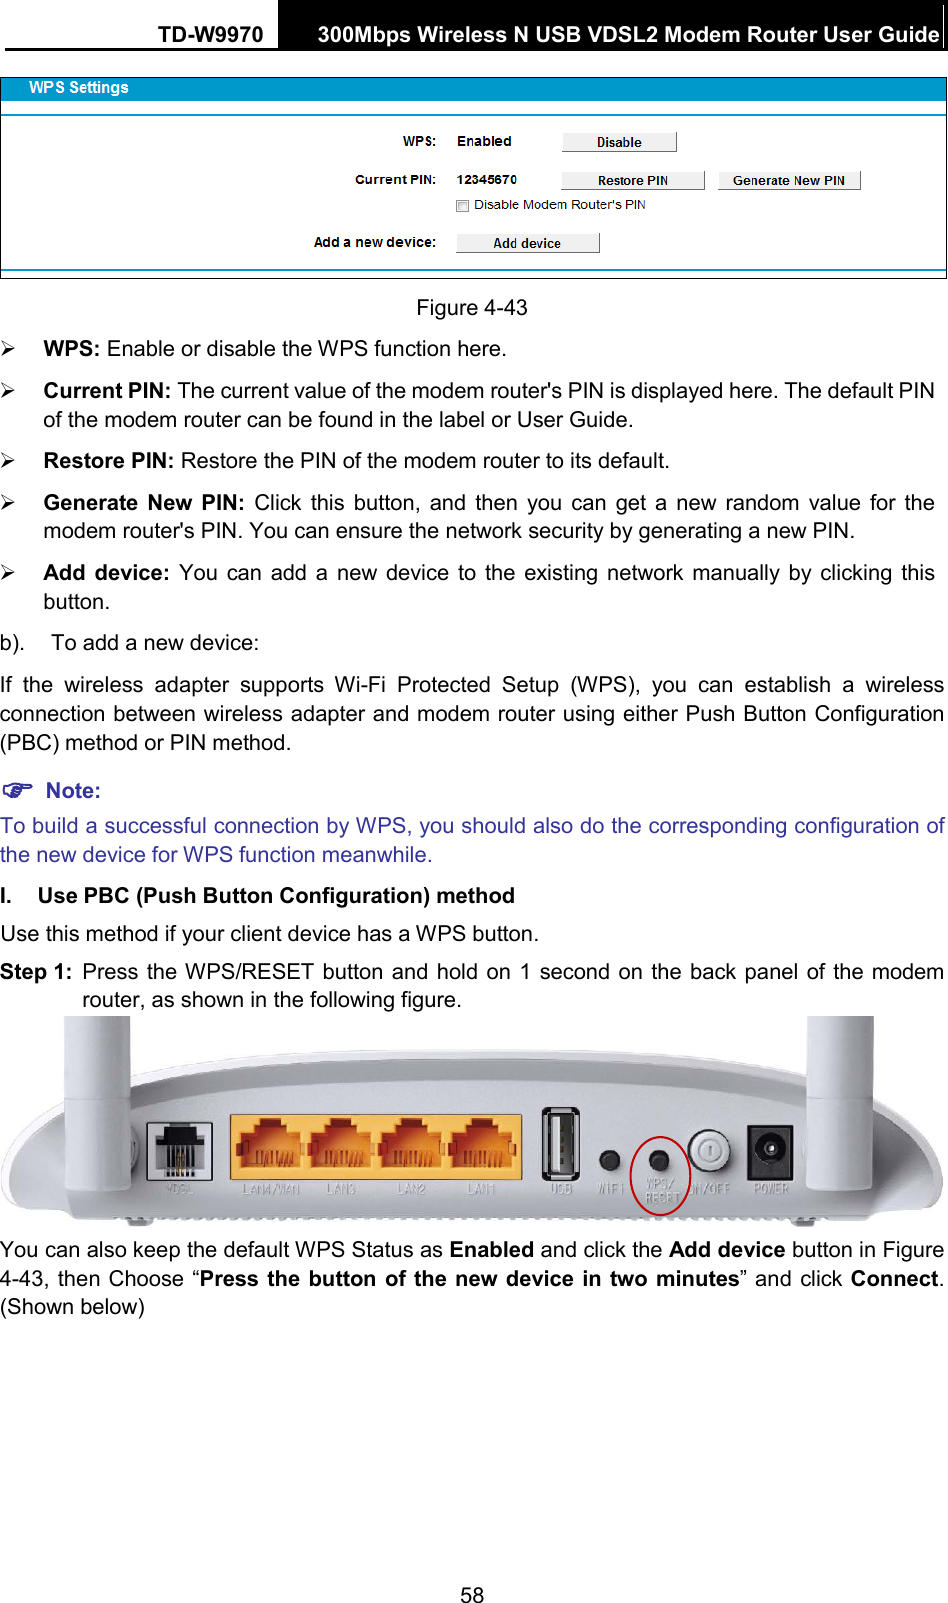 TD-W9970 300Mbps Wireless N USB VDSL2 Modem Router User Guide   Figure 4-43  WPS: Enable or disable the WPS function here.    Current PIN: The current value of the modem router&apos;s PIN is displayed here. The default PIN of the modem router can be found in the label or User Guide.    Restore PIN: Restore the PIN of the modem router to its default.    Generate New PIN: Click this button, and then you can get a new random value for the modem router&apos;s PIN. You can ensure the network security by generating a new PIN.  Add device: You can add a new device to the existing network manually by clicking this button. b). To add a new device: If  the wireless adapter supports Wi-Fi Protected Setup (WPS), you can establish a wireless connection between wireless adapter and modem router using either Push Button Configuration (PBC) method or PIN method.  Note: To build a successful connection by WPS, you should also do the corresponding configuration of the new device for WPS function meanwhile. I. Use PBC (Push Button Configuration) method Use this method if your client device has a WPS button. Step 1: Press the WPS/RESET button and hold on 1 second on the back panel of the modem router, as shown in the following figure.  You can also keep the default WPS Status as Enabled and click the Add device button in Figure 4-43, then Choose “Press the button of the new device in two minutes”  and click Connect. (Shown below) 58 